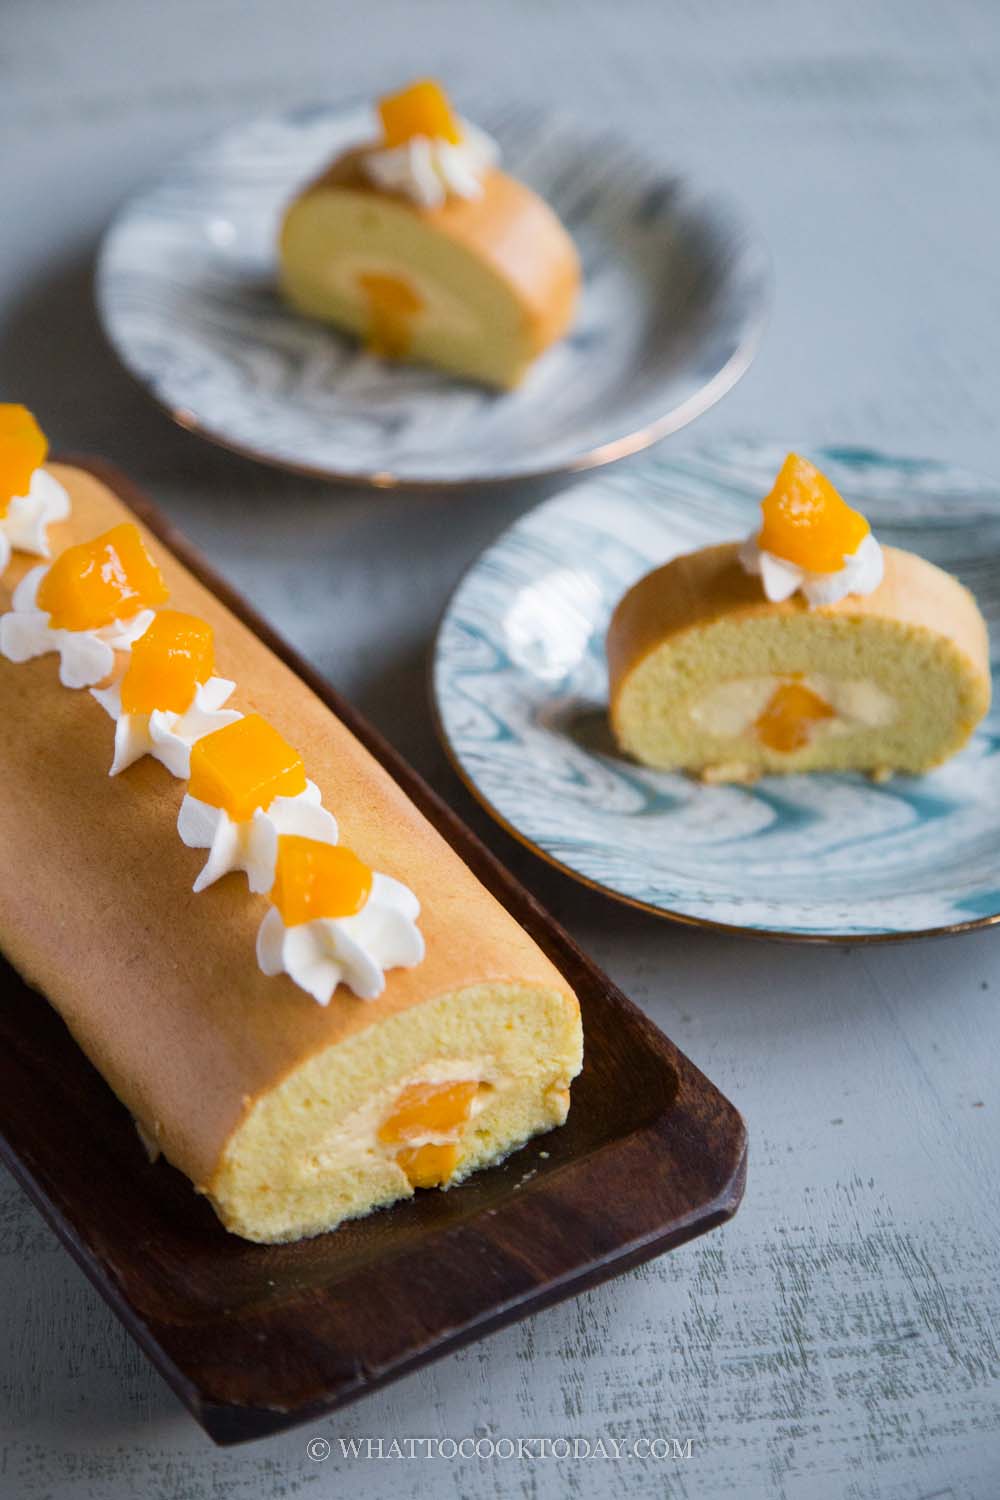 Our baking recipe for the traditional Three Kings Cake - Dreikönigskuchen